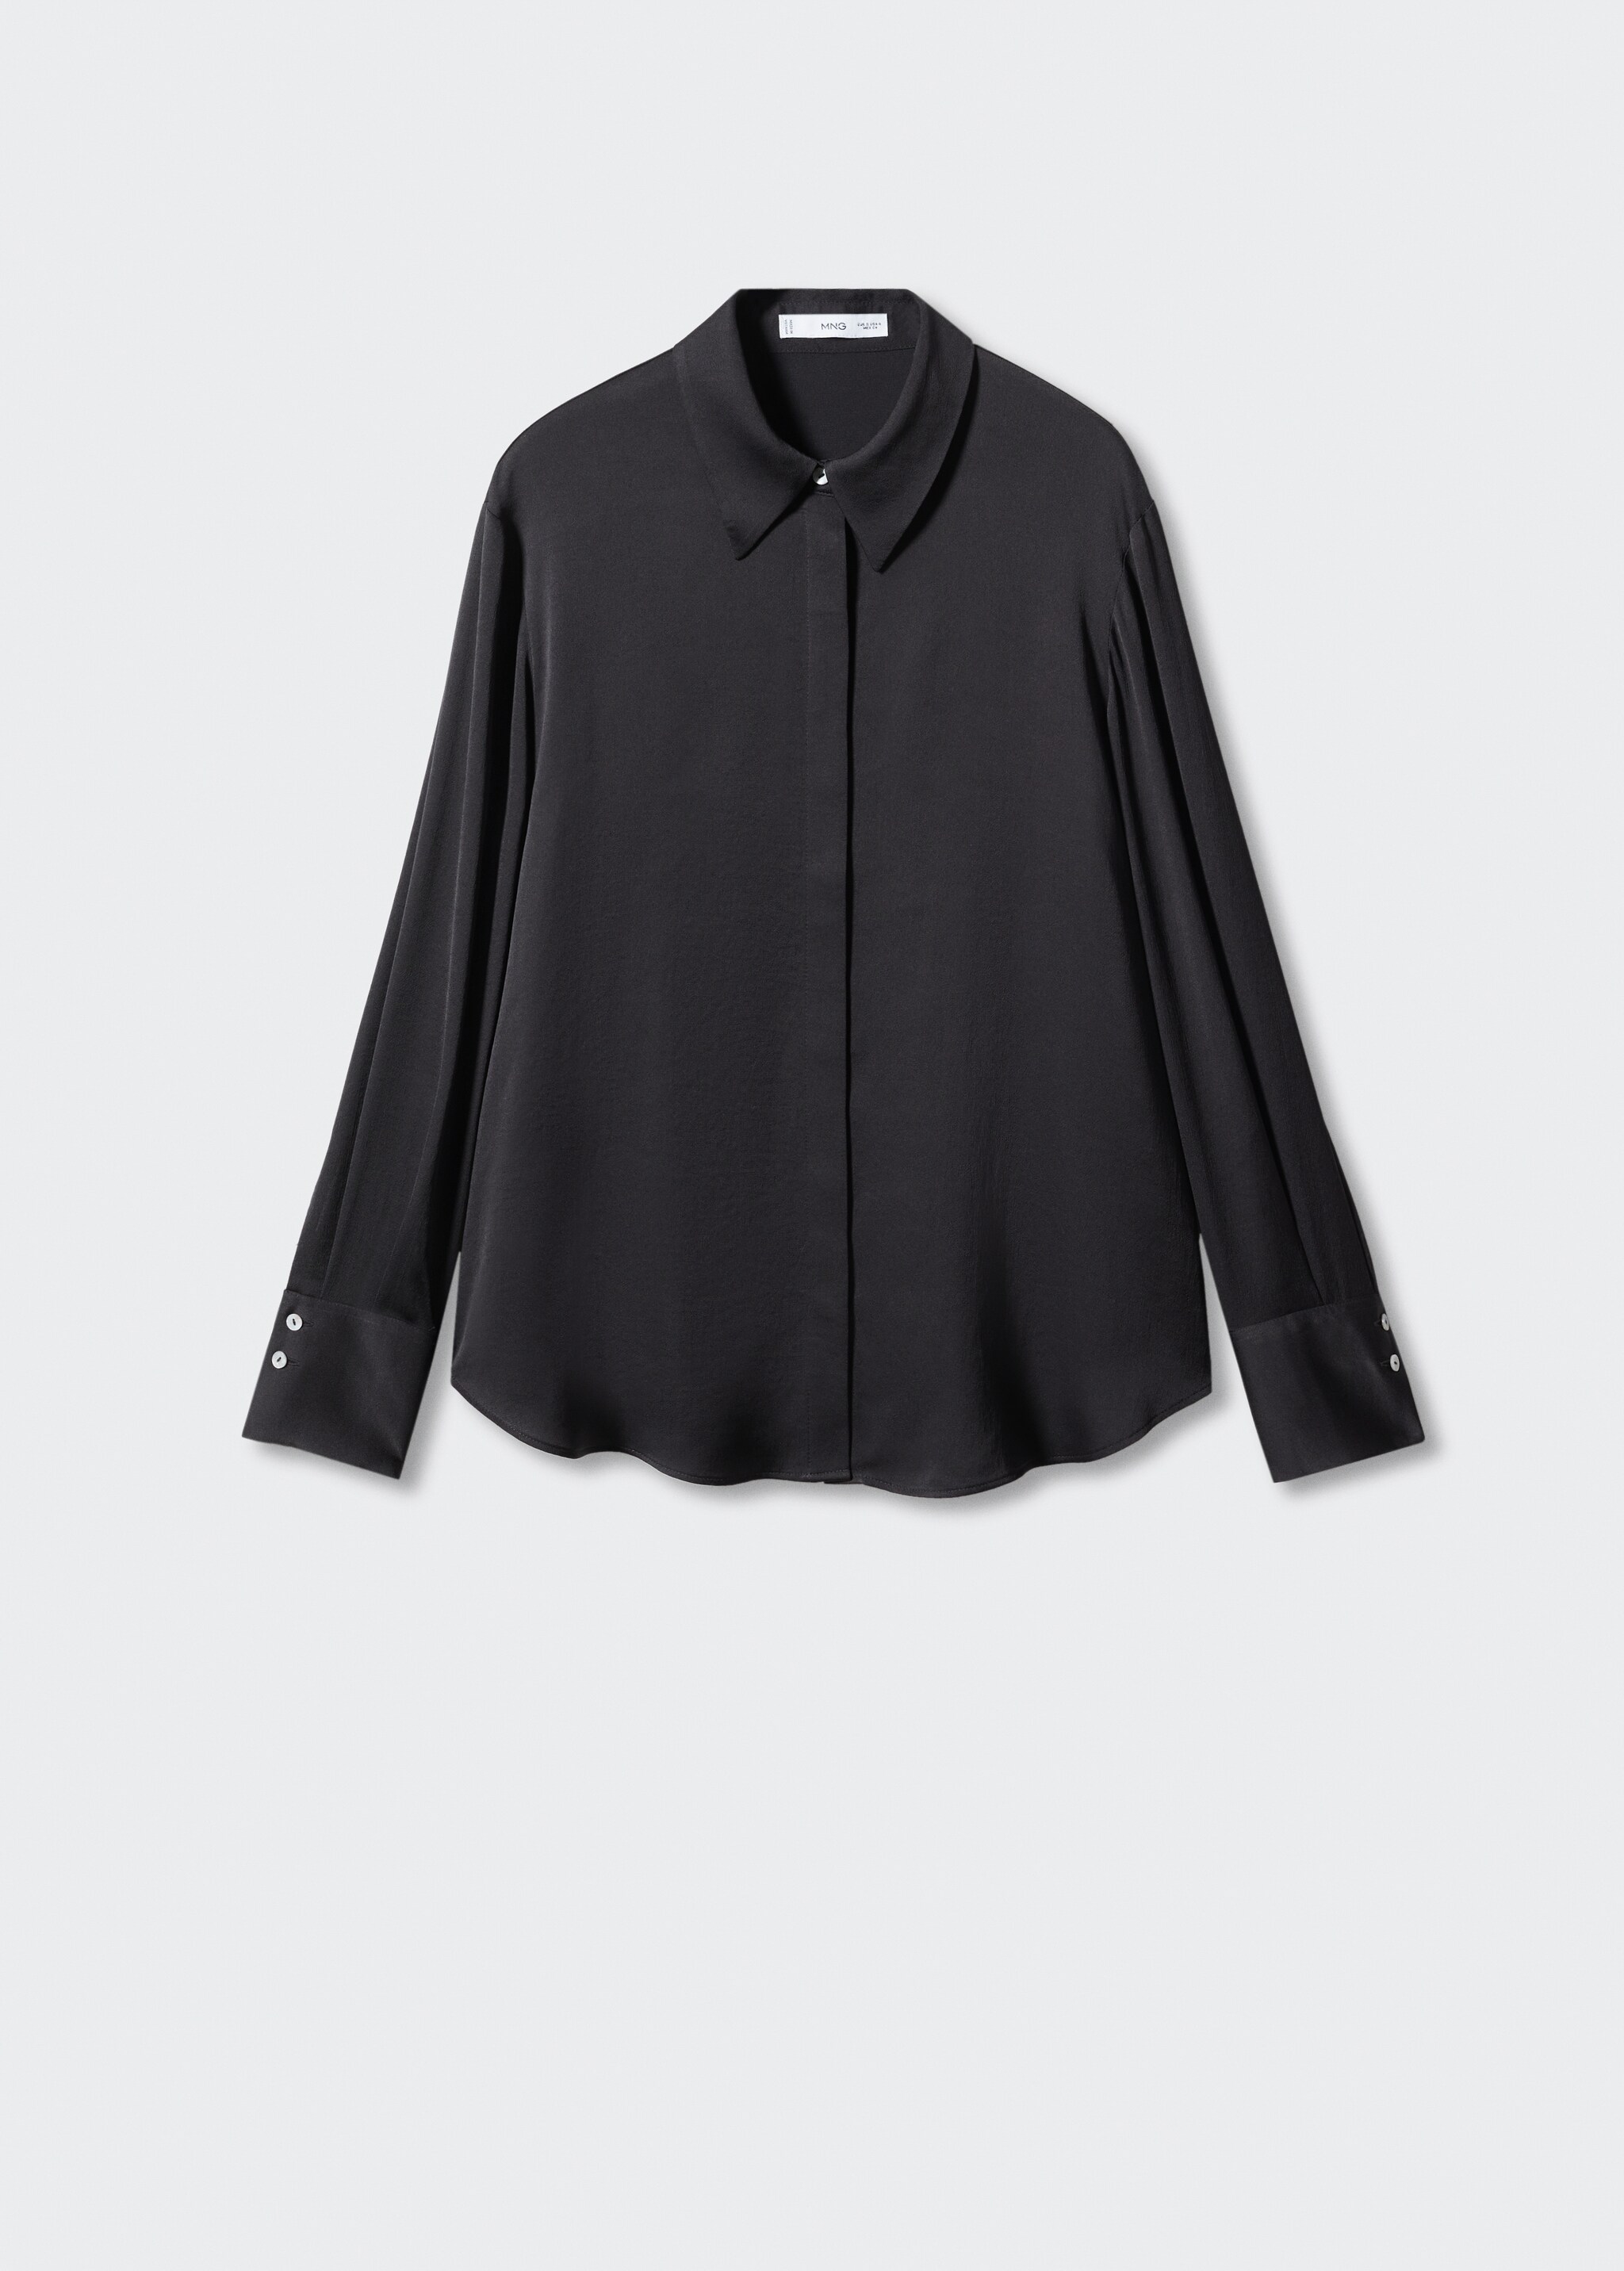 Satin finish flowy shirt - Article without model